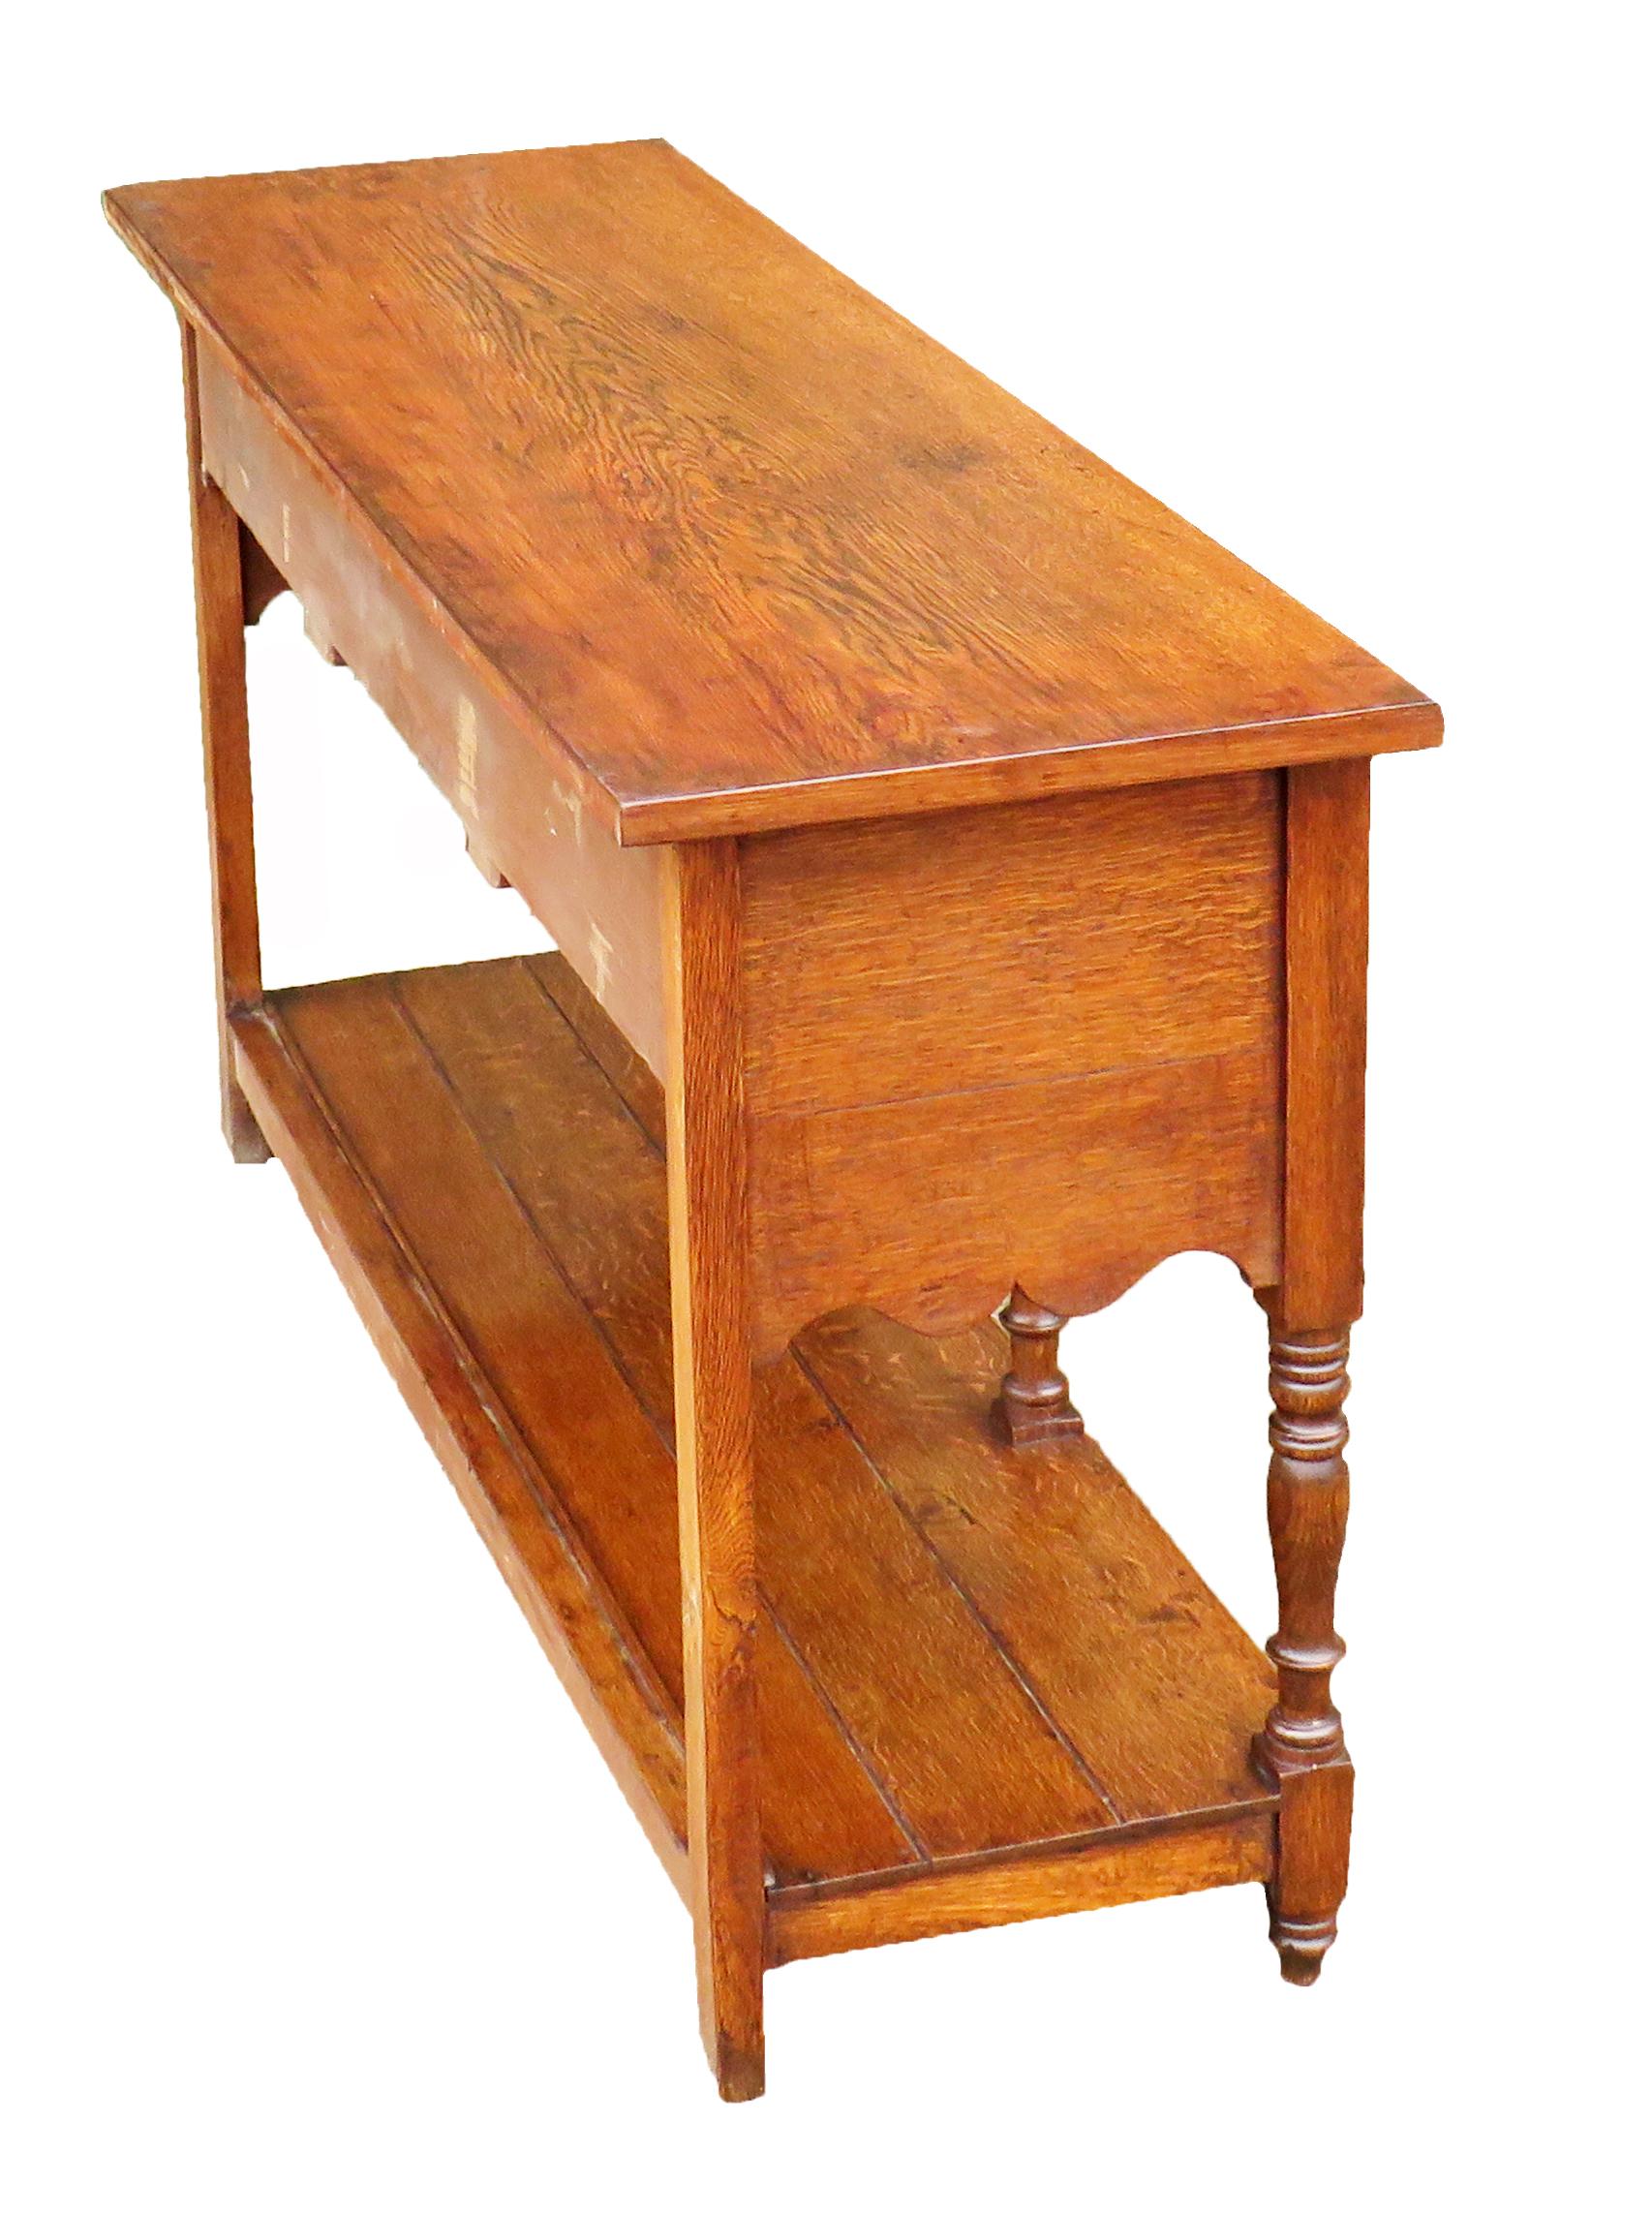 An attractive mid-19th century oak dresser base
Of good proportions having well figured top over
Three frieze drawers with later brass handles and
Elegant shaped apron raised on turned upright
With original pot board shelf below

(A very